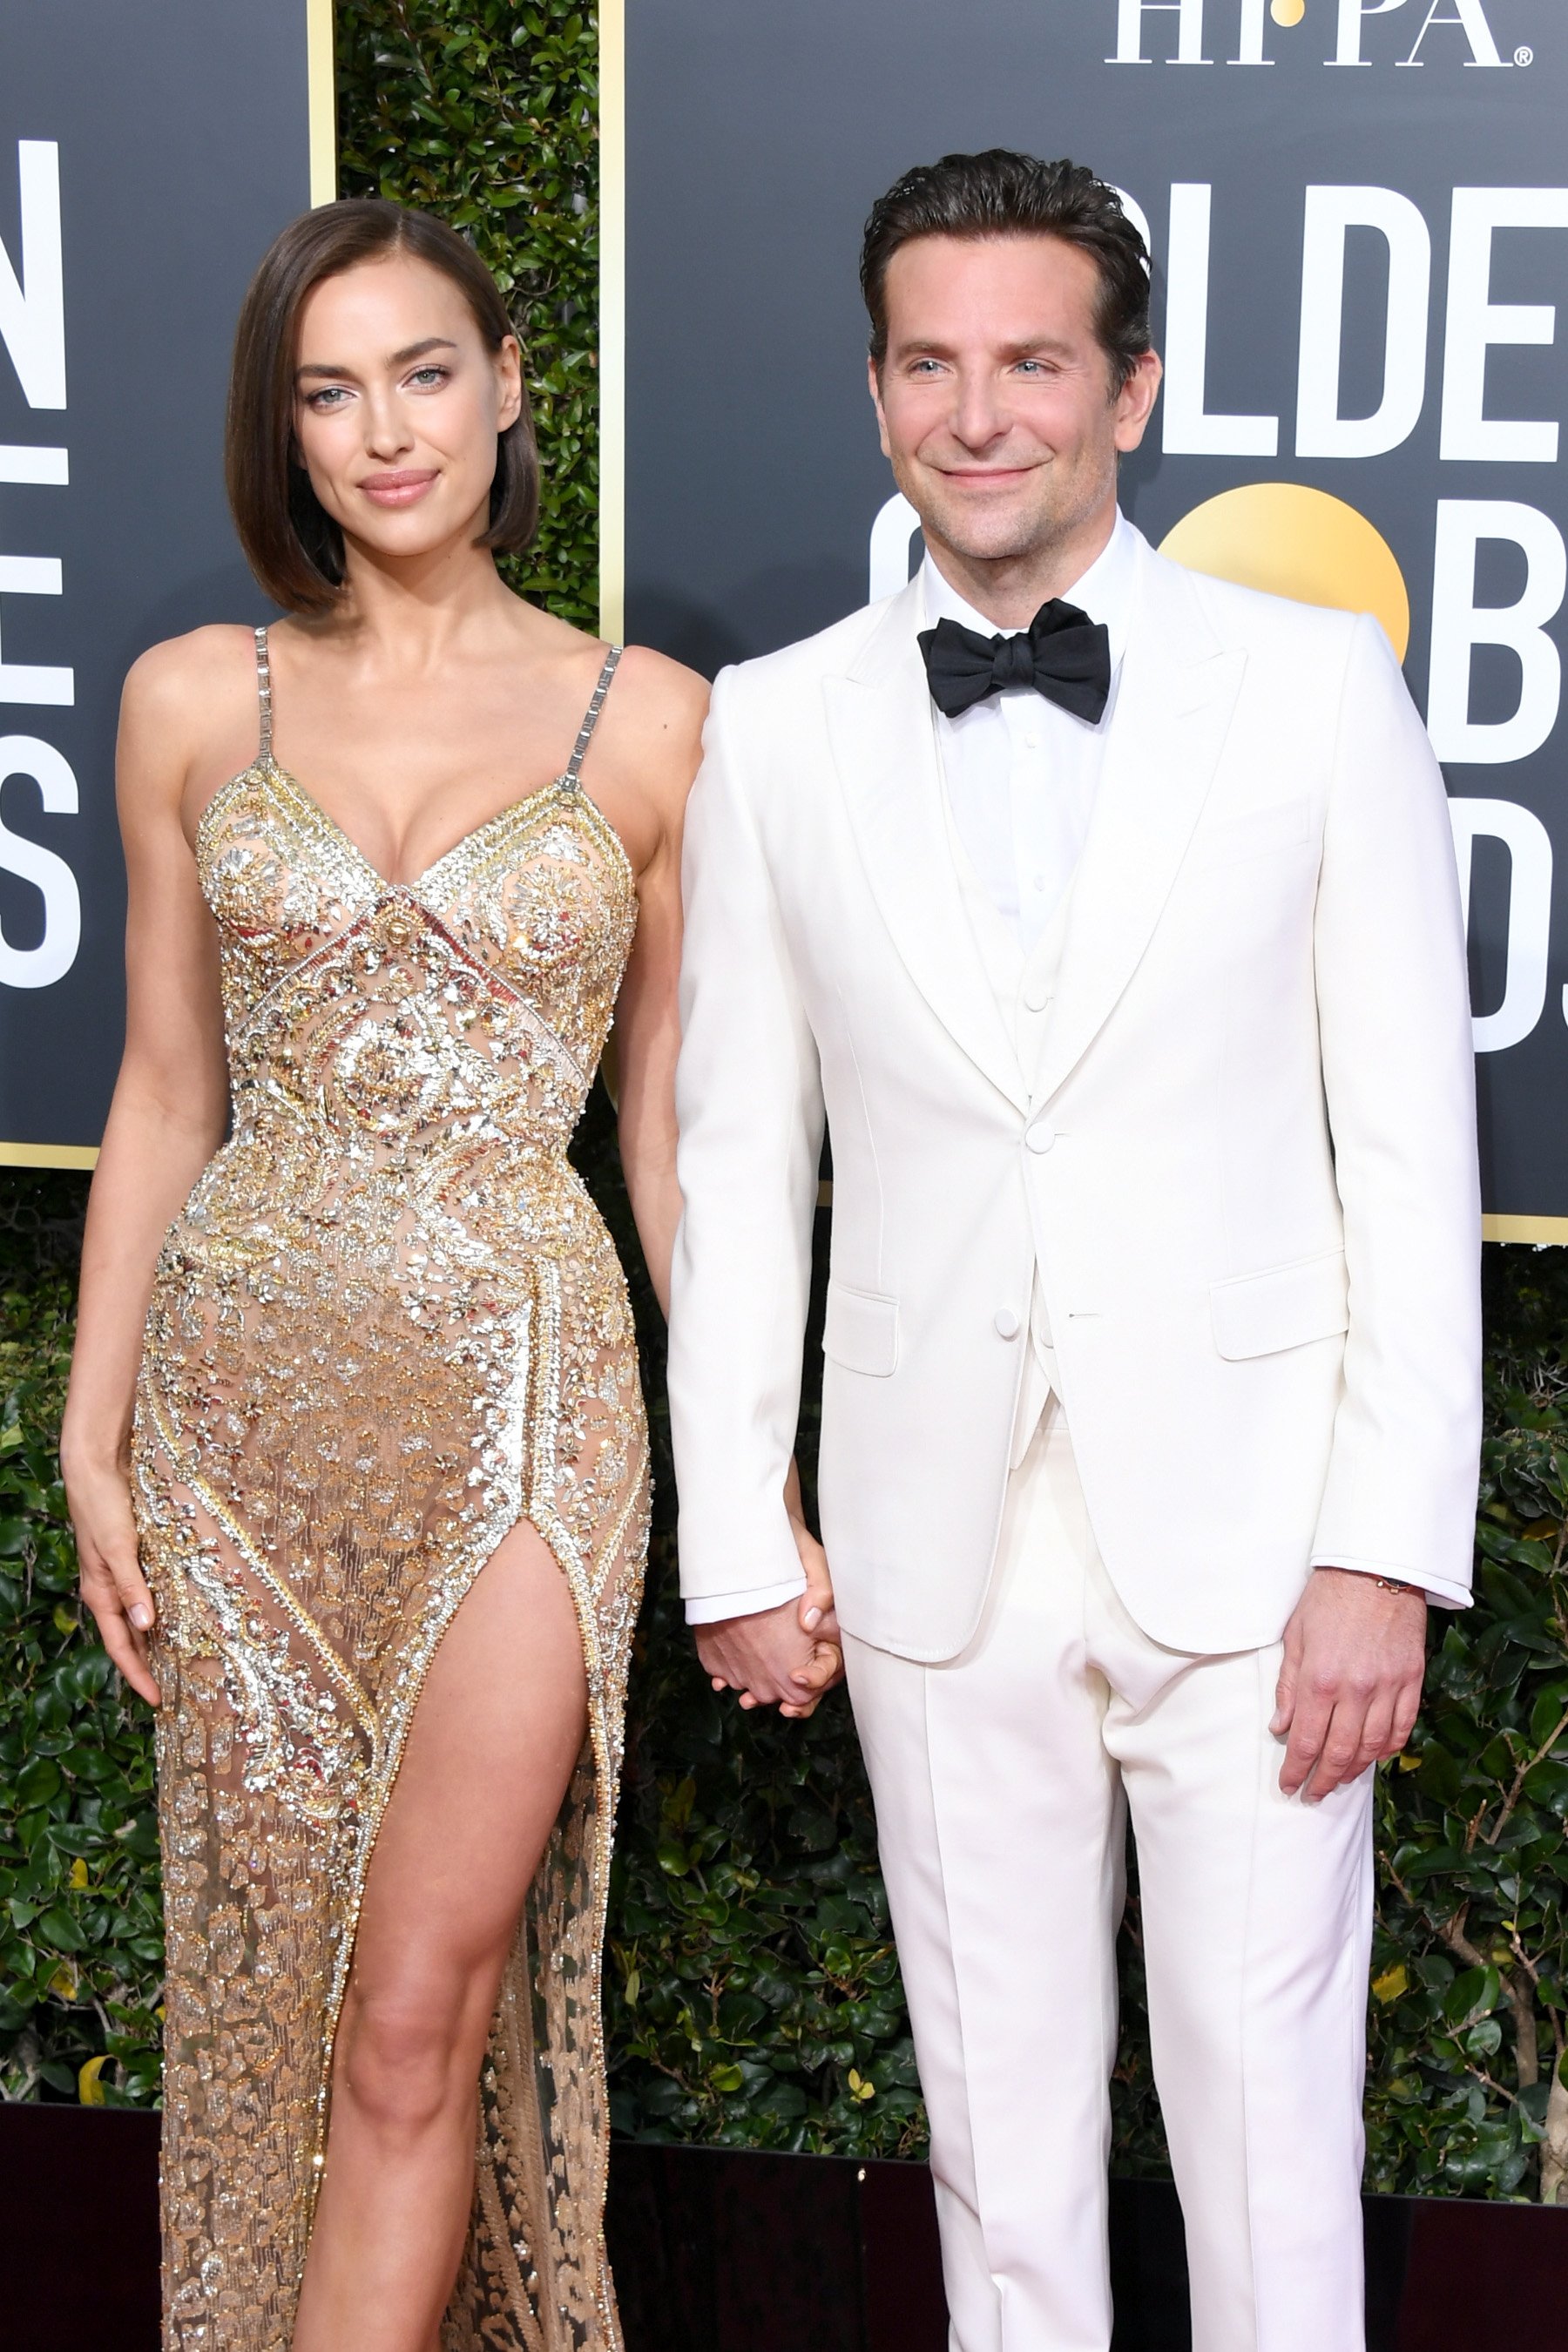 Irina Shayk and Bradley Cooper at the 76th Annual Golden Globe Awards on January 6, 2019, in Beverly Hills, California. | Photo: Getty Images